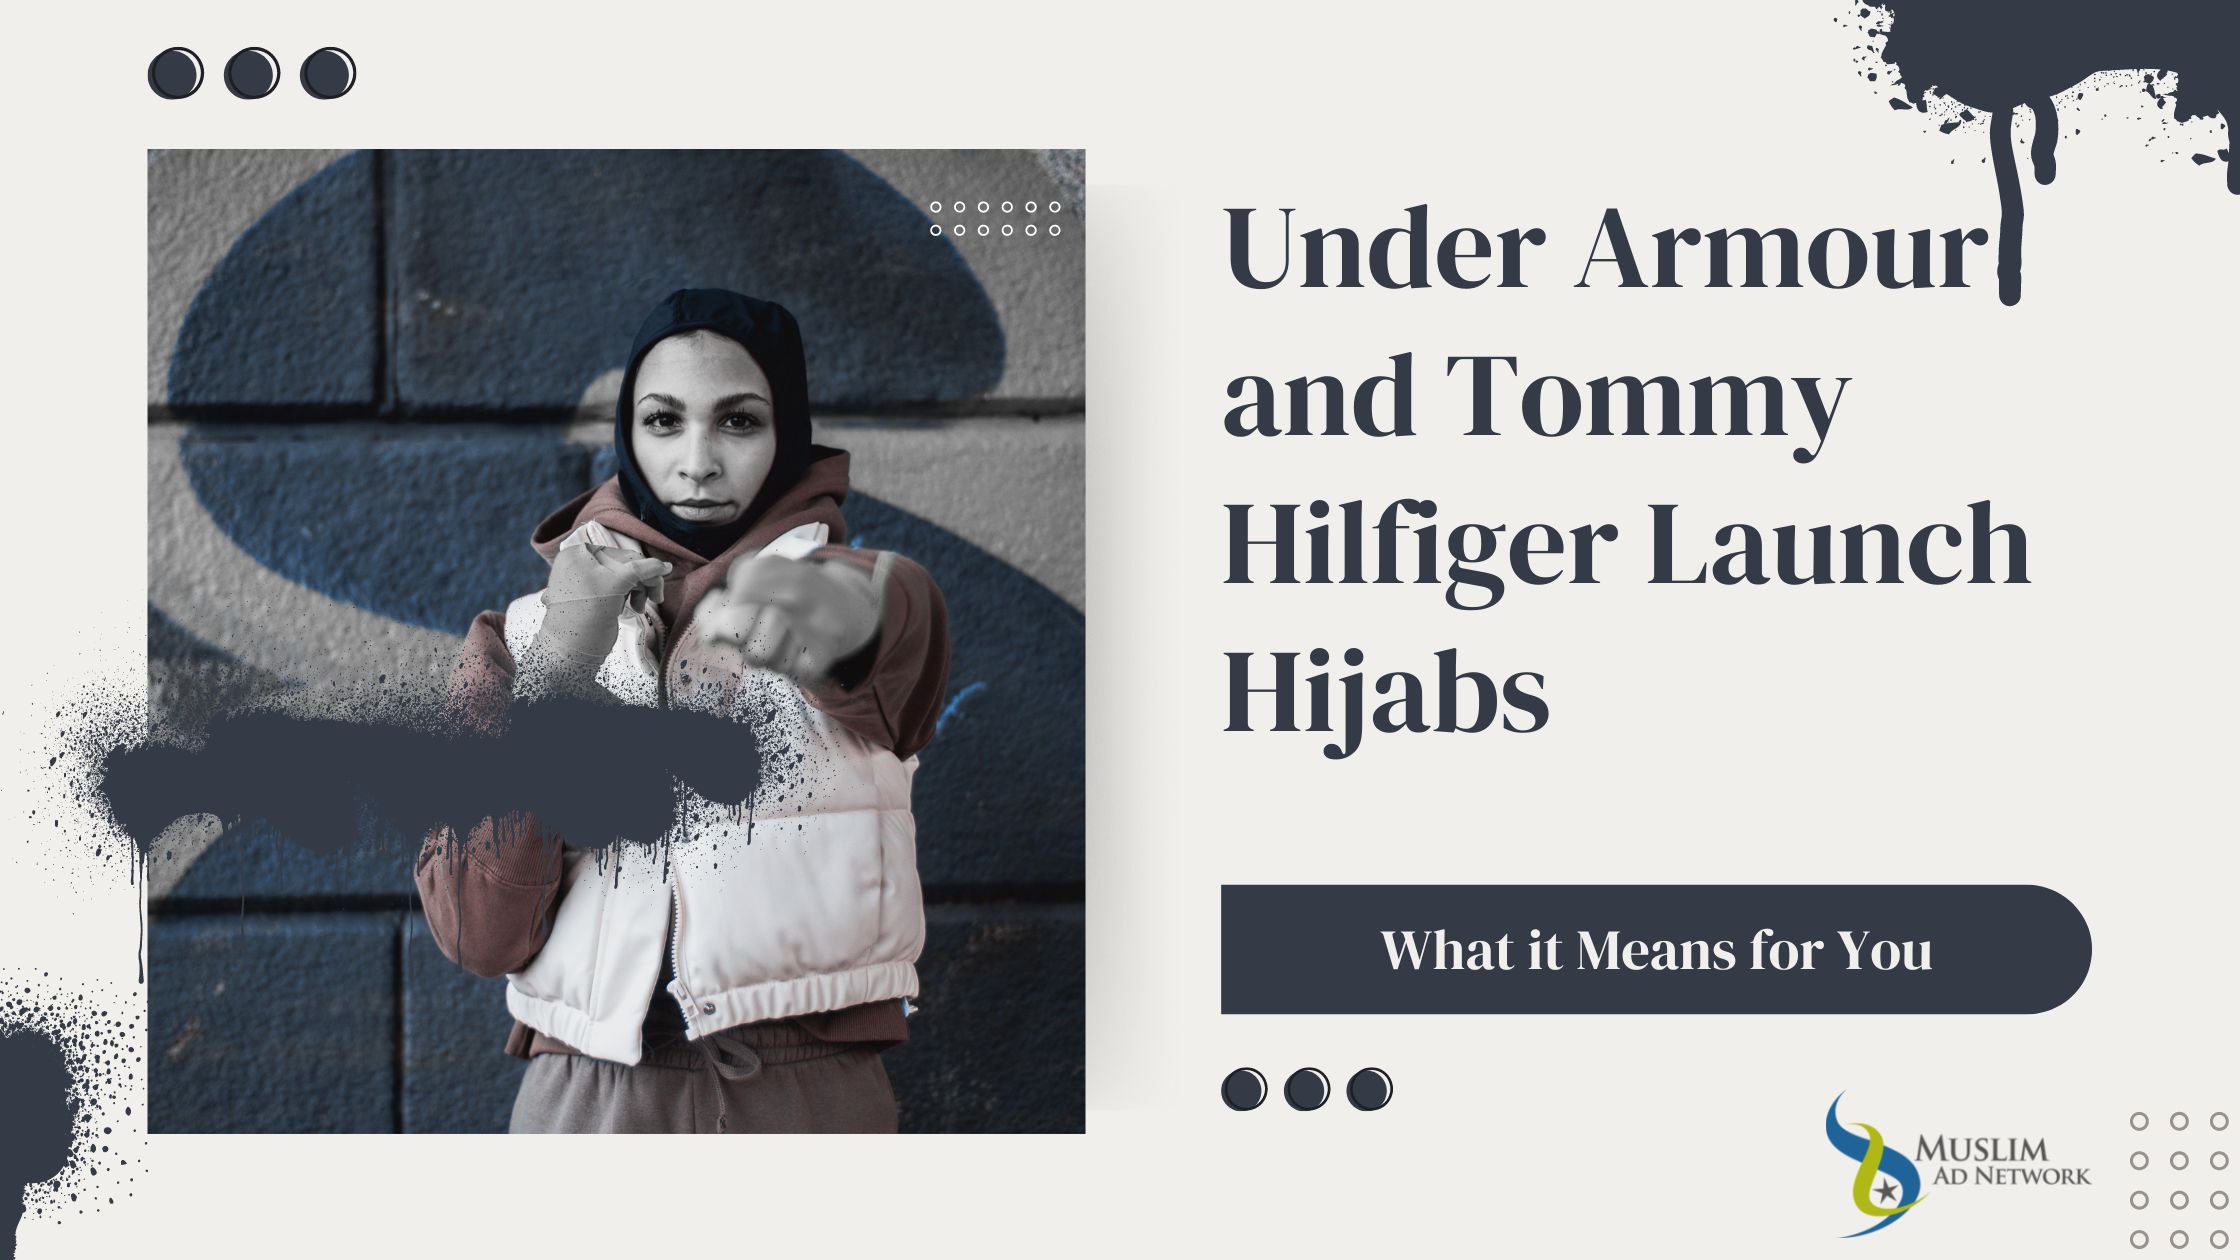 Under Armour and Tommy Hilfiger Launch Hijabs